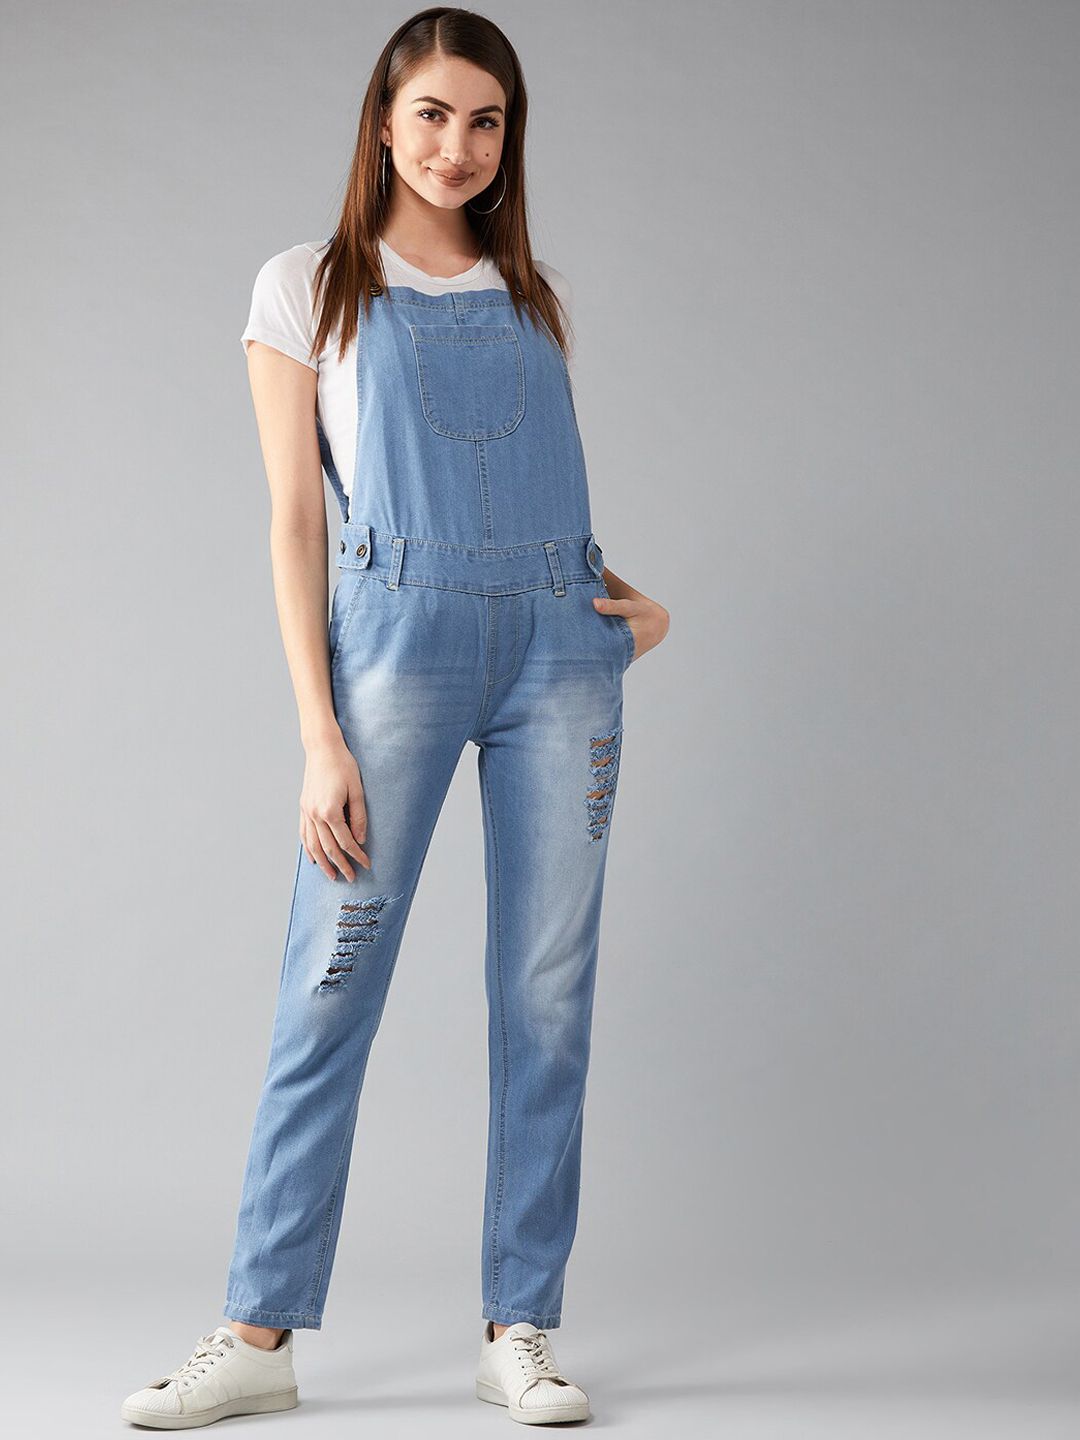 BAESD Women Cotton Dungaree With T-Shirt Price in India